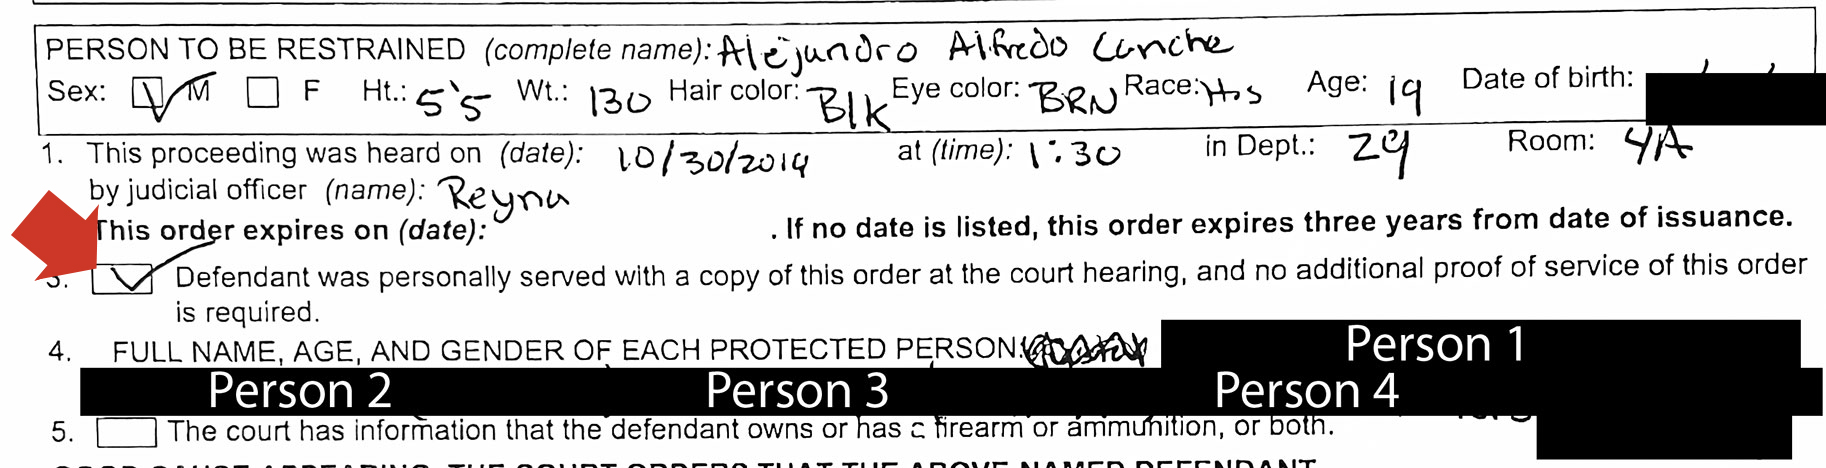 excerpt of restraining order issued against Alejandro Canche